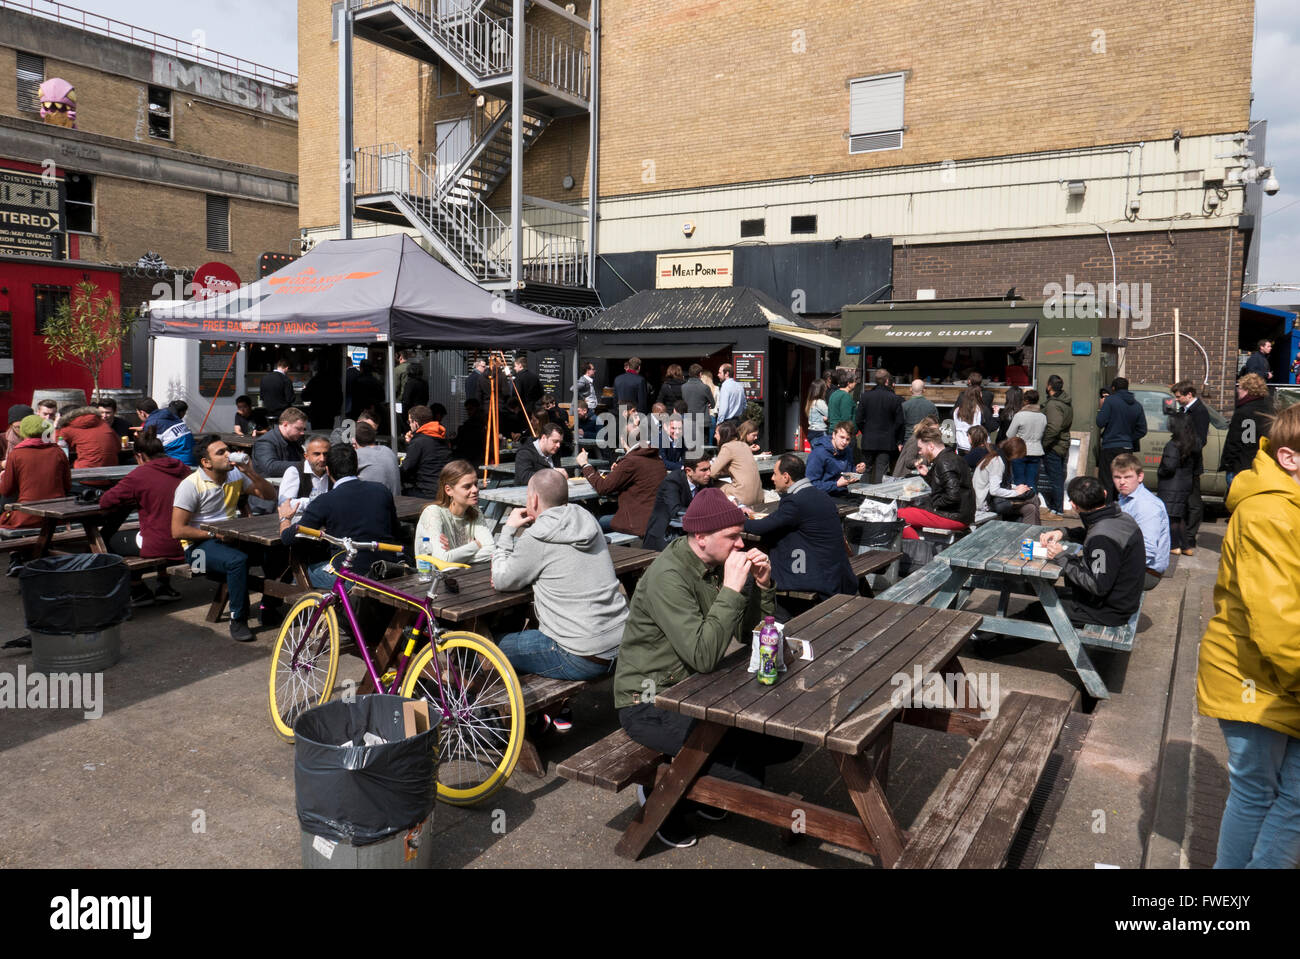 People eating fast food and drinking in an outdoor restaurant in London, United Kingdom. Stock Photo